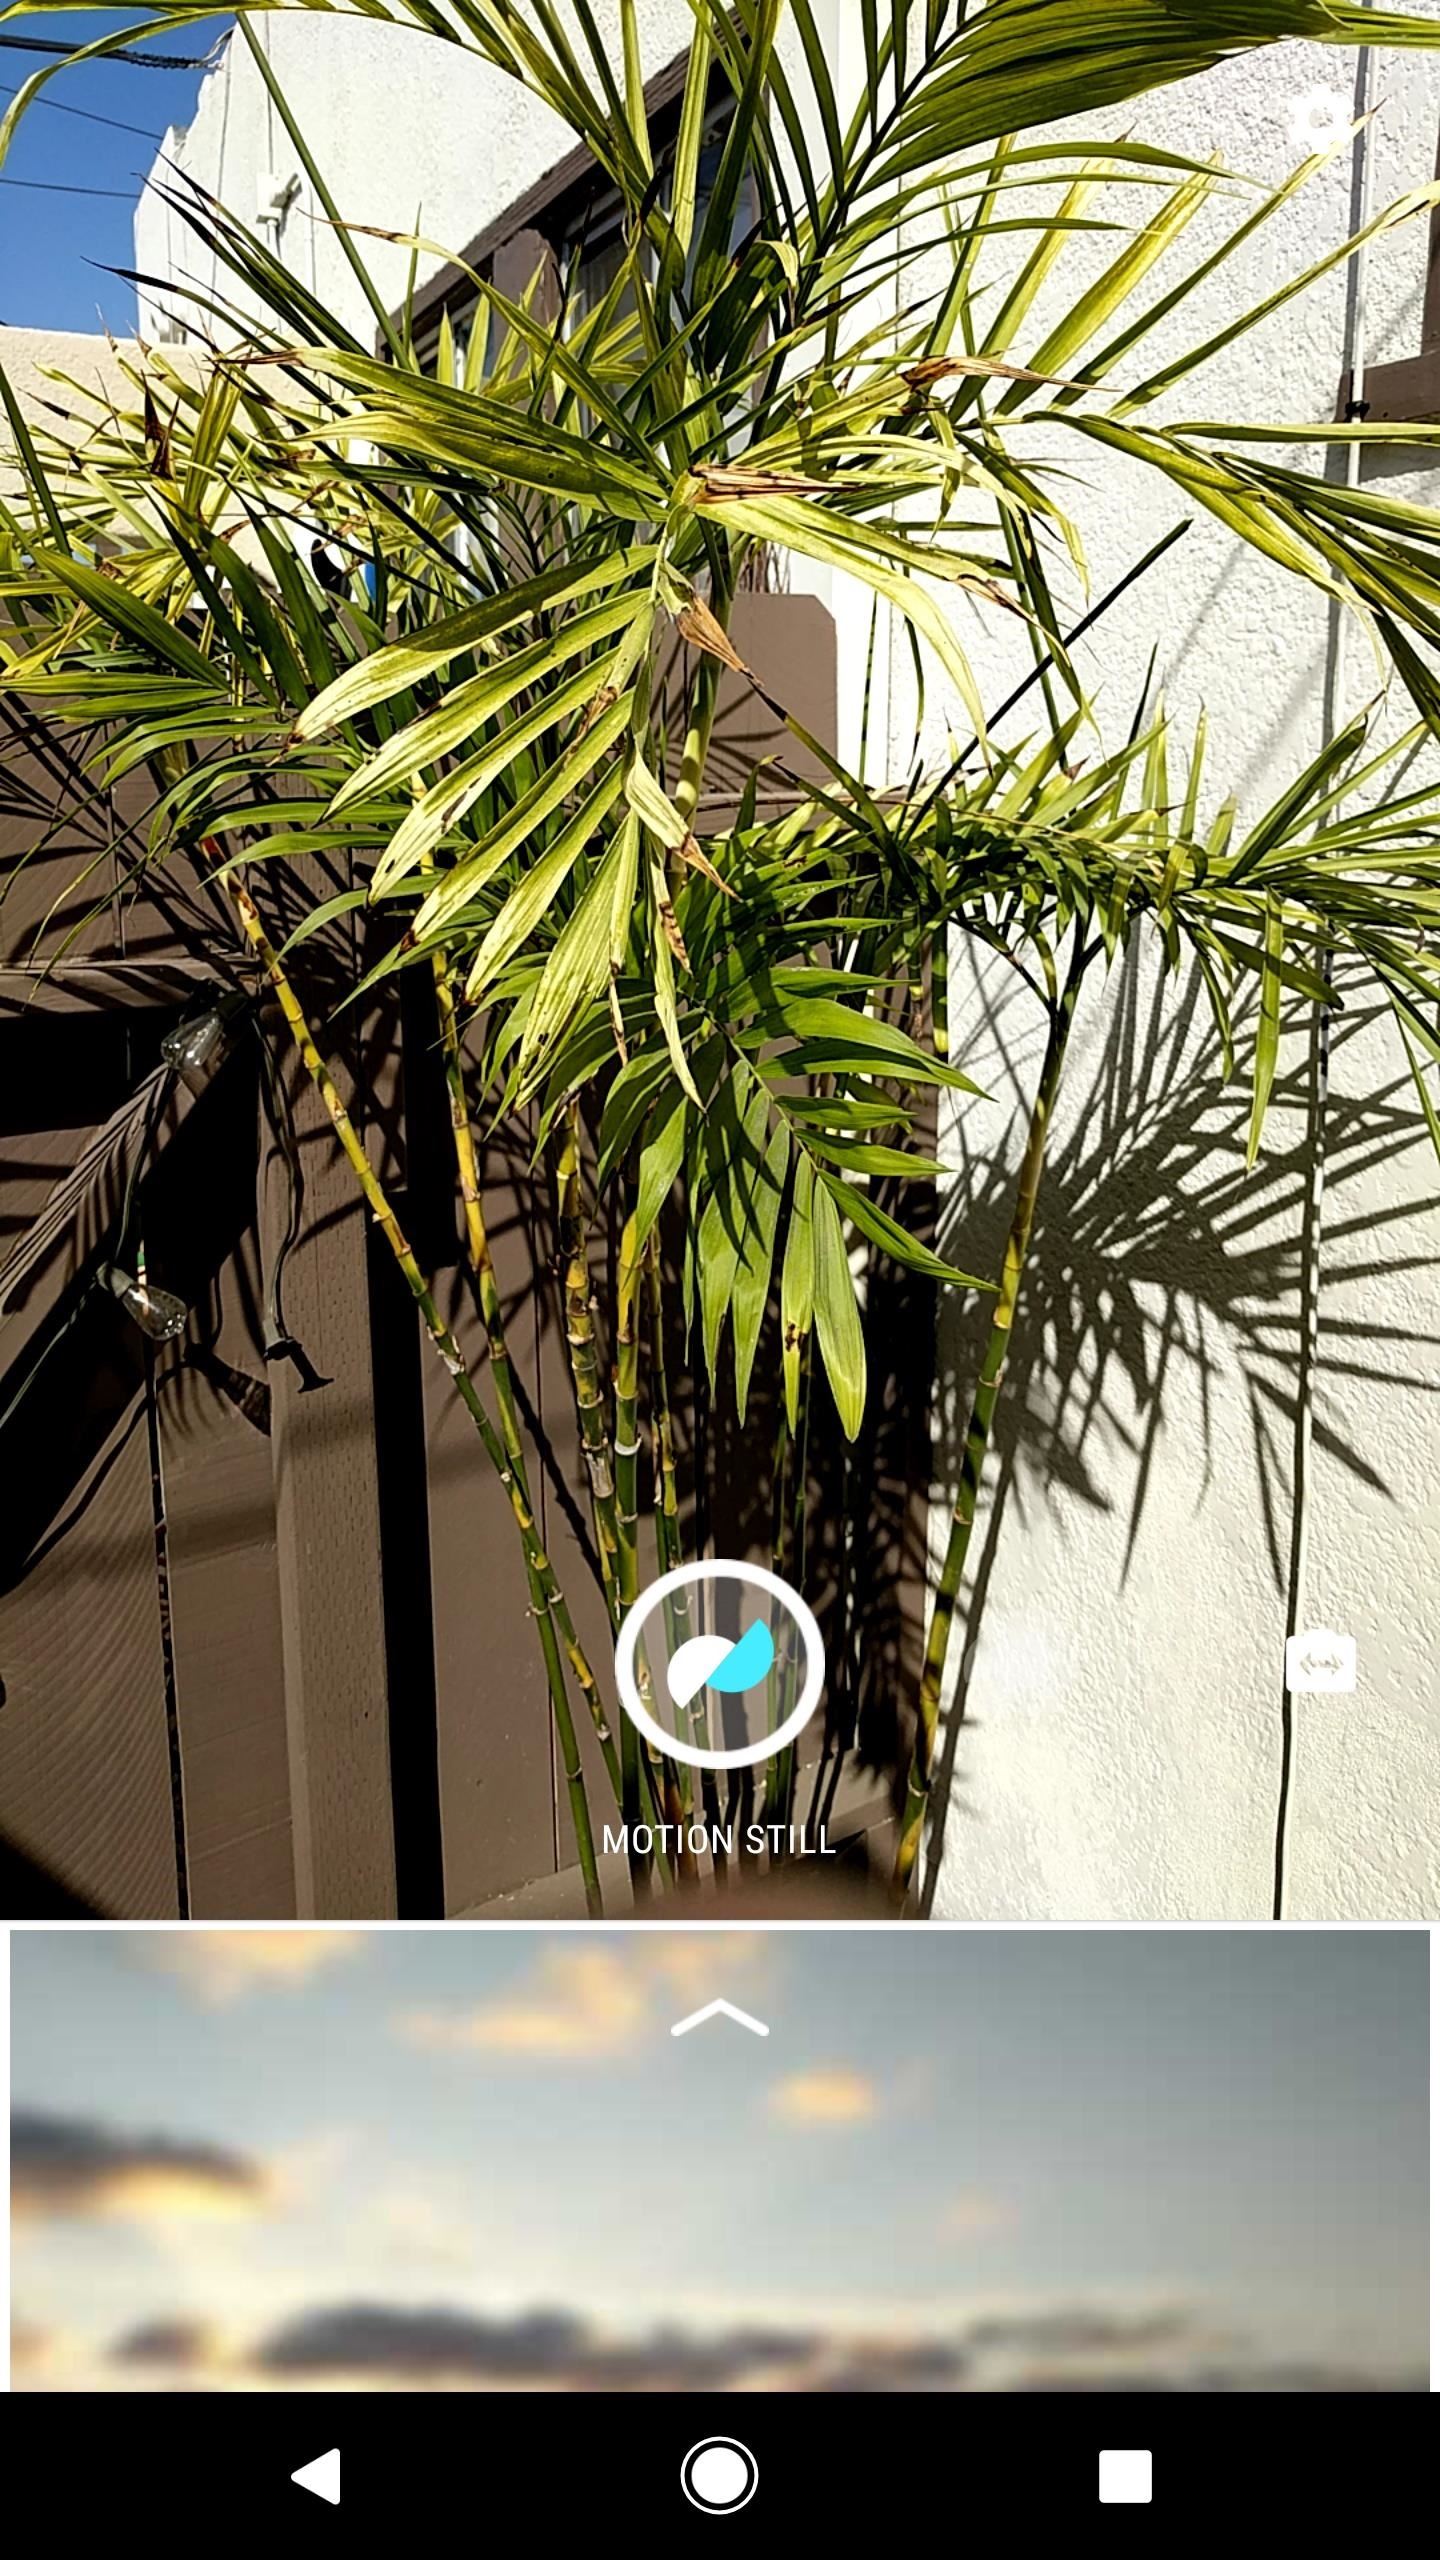 Still Missing Live Photos on Your Android? Try These 3 Apps